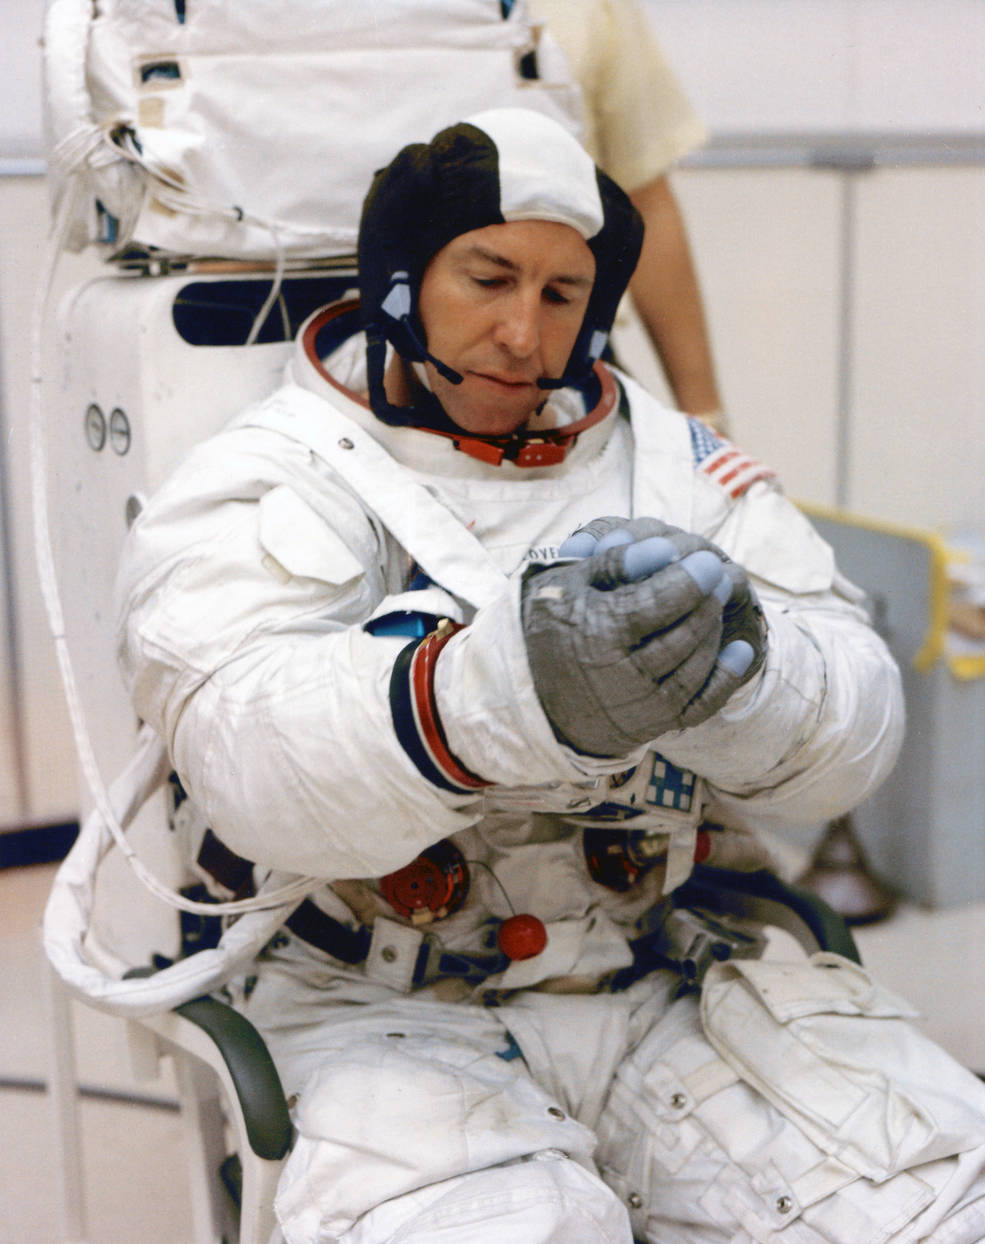 NASA Astronaut Jim Lovell during training in his EVA suit, January 1970